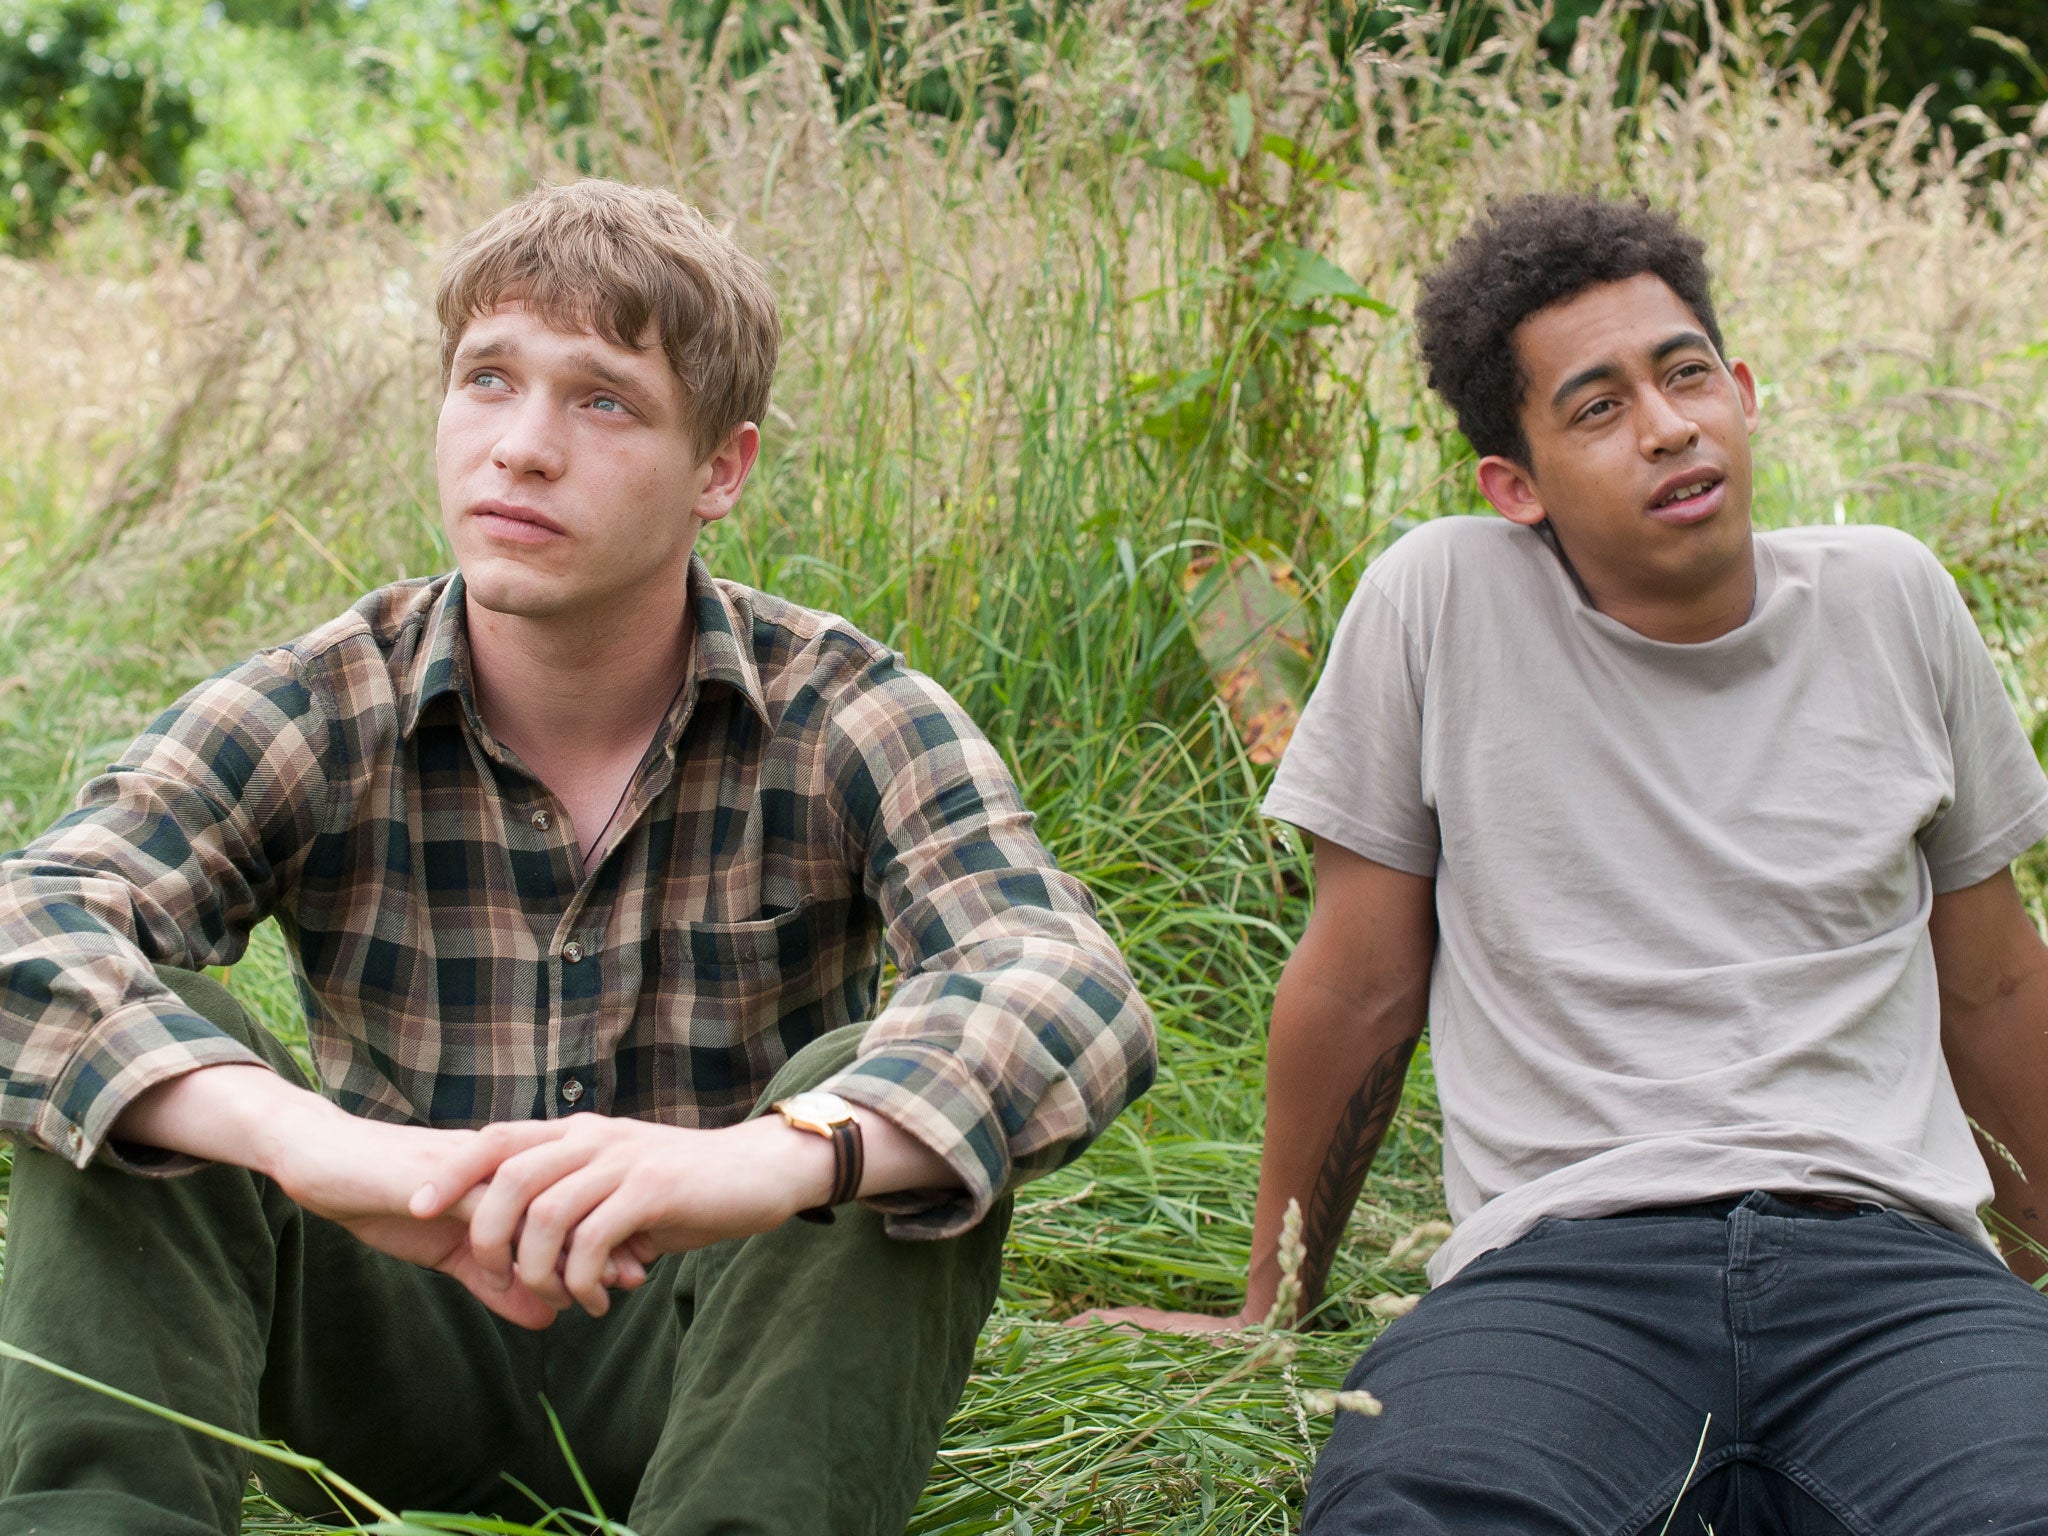 Glue features badly behaved but ambitious teenagers living in the countryside